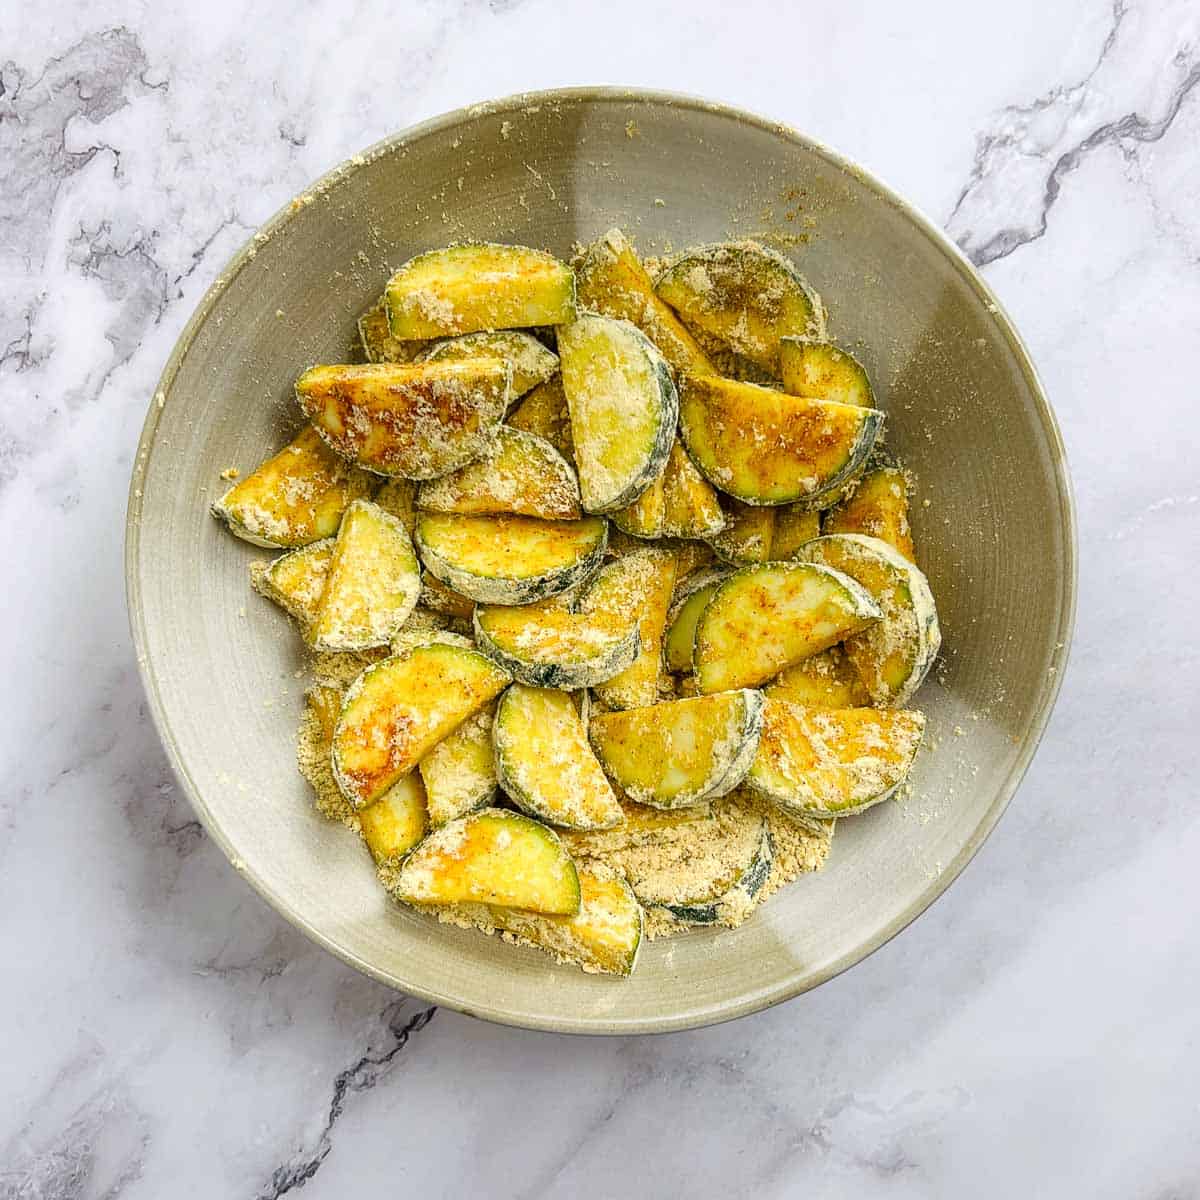 Zucchini slices coated with chickpea flour and spices.